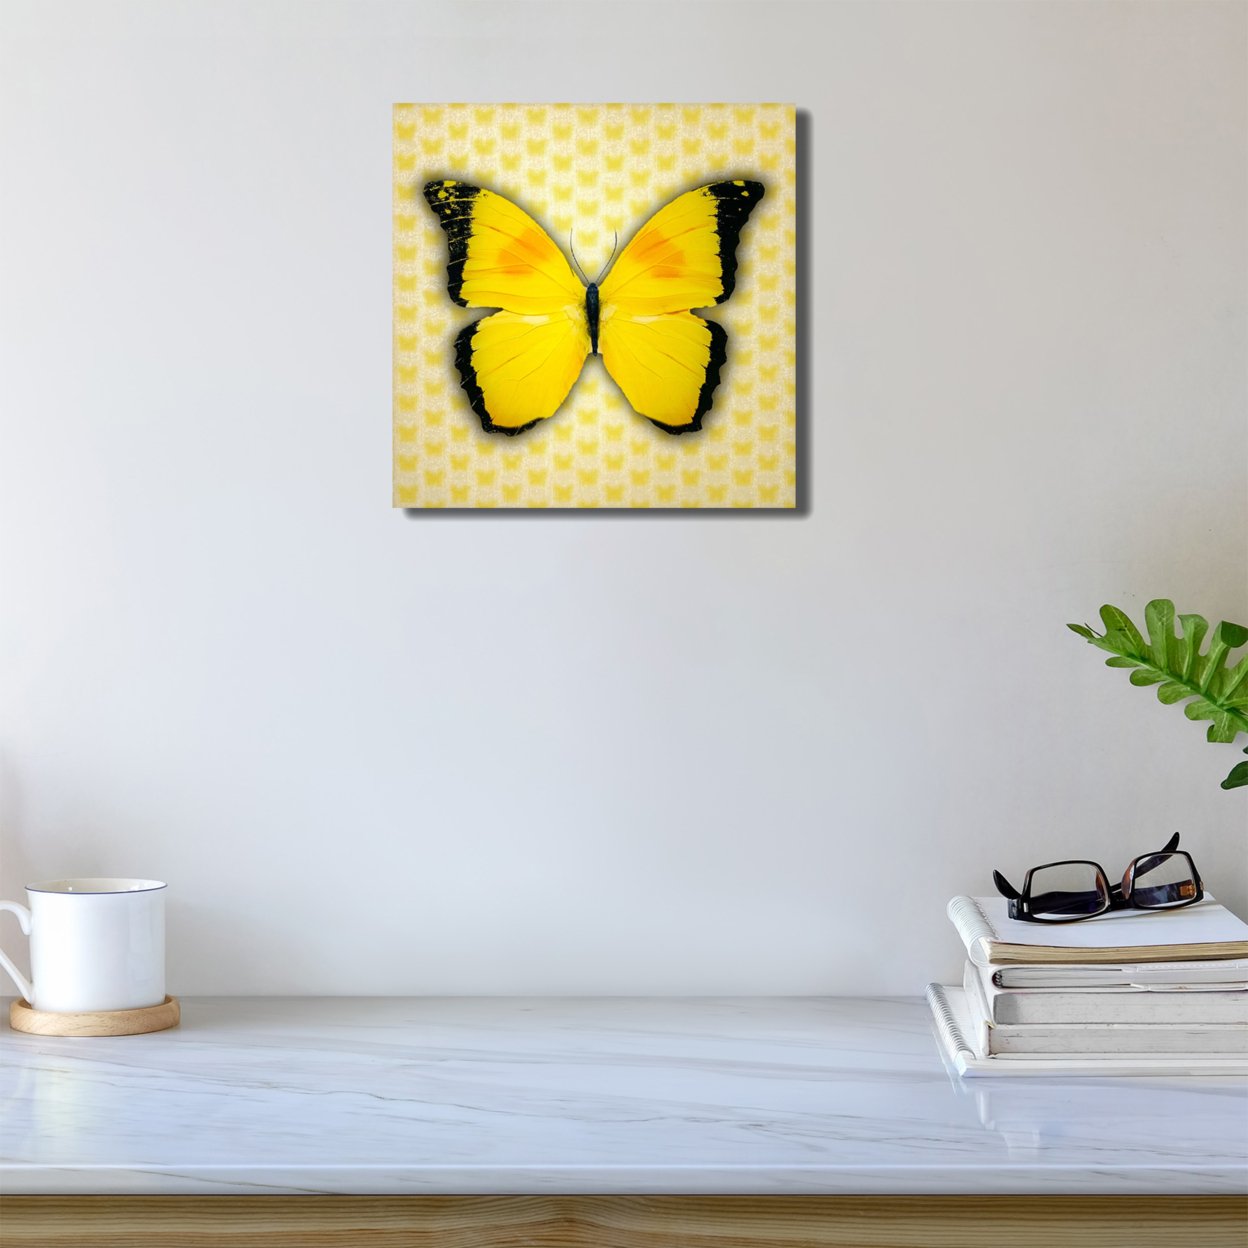 5D Multi-Dimensional Yellow Butterfly Wall Art Print On Strong Polycarbonate Panel - Immersive, Lenticular Artwork By Matashi (12x12 Inch)